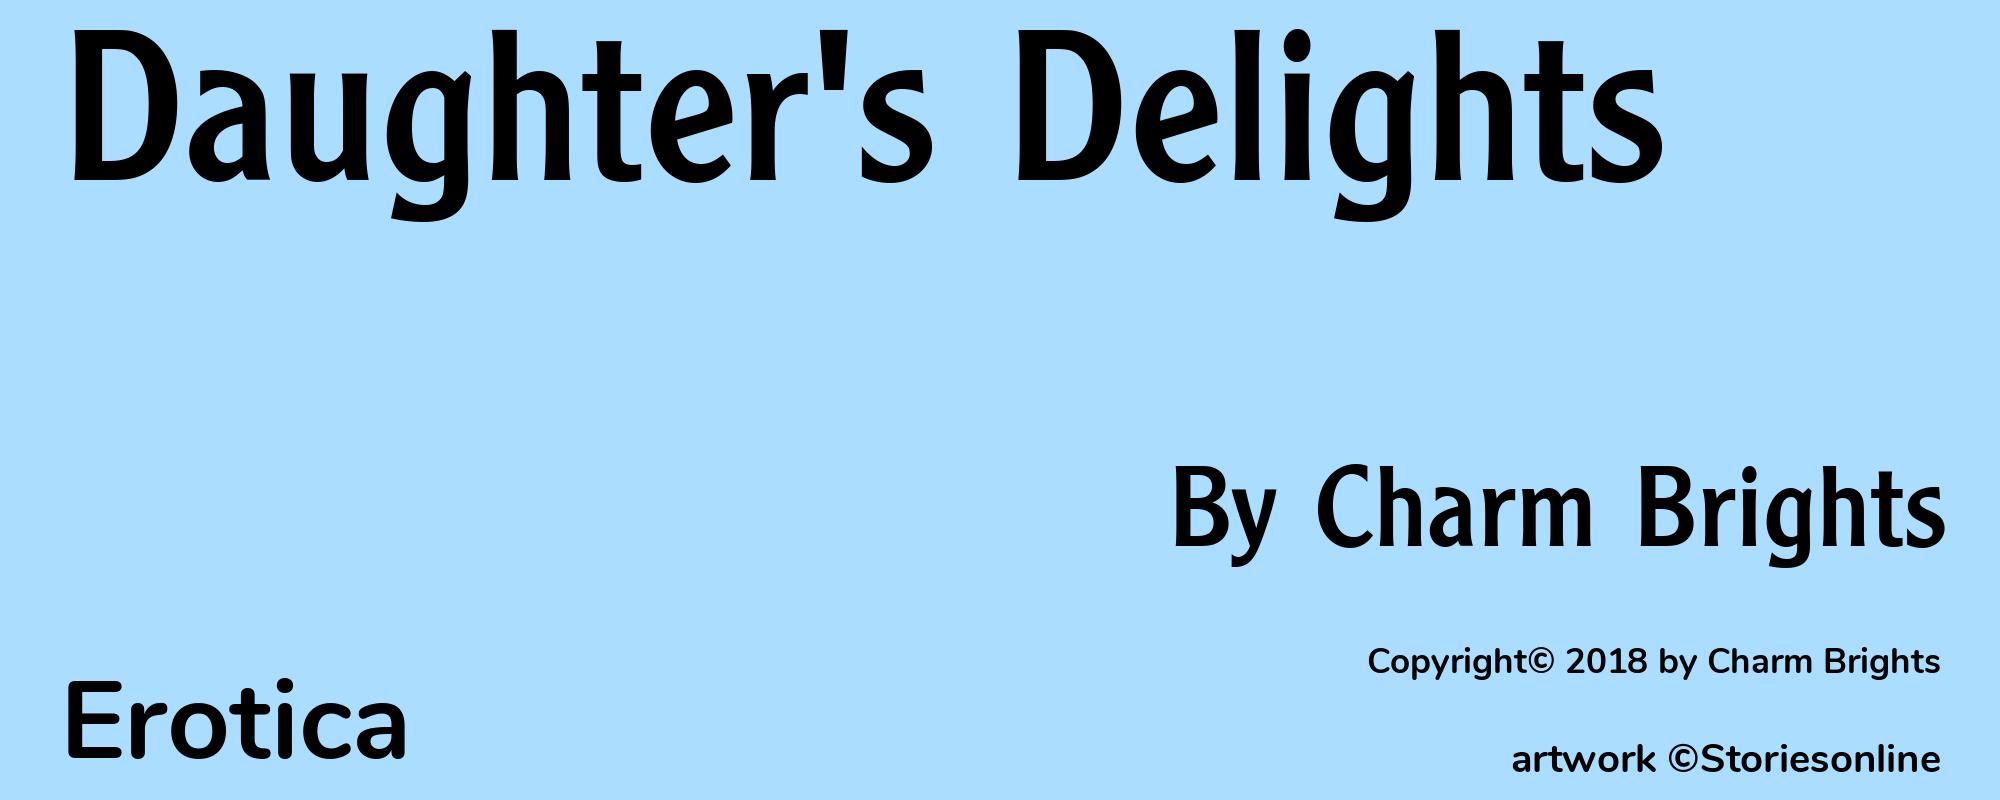 Daughter's Delights - Cover